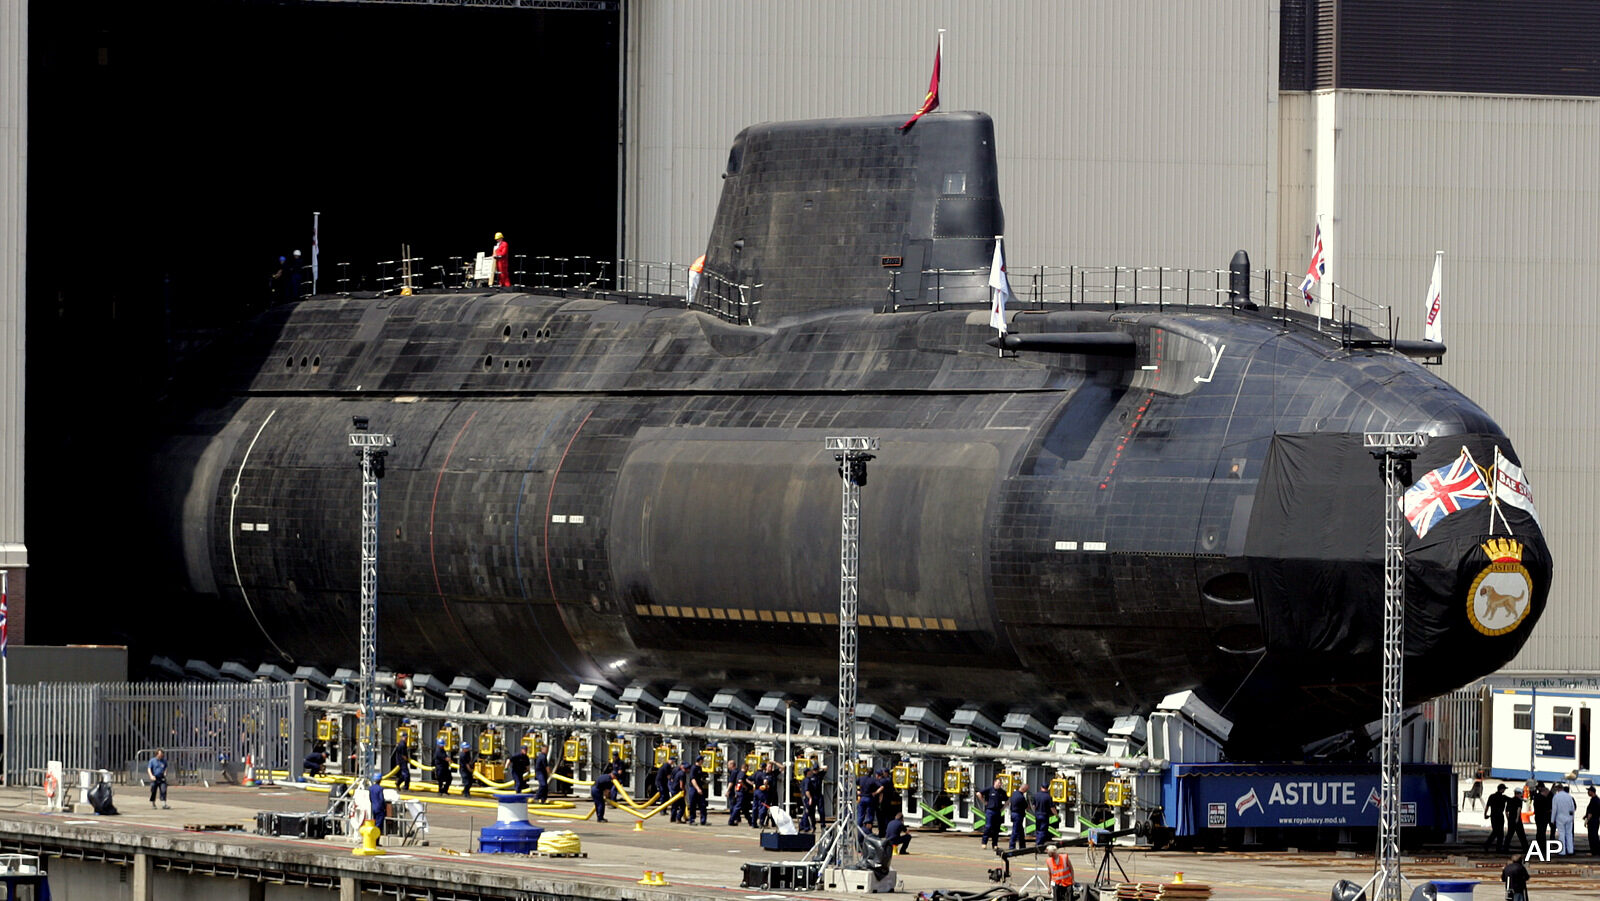 The first Astute class nuclear submarine is rolled out at the BAE Systems production plant in Barrow-in-Furness, Cumbria, England, Friday June 8, 2007.